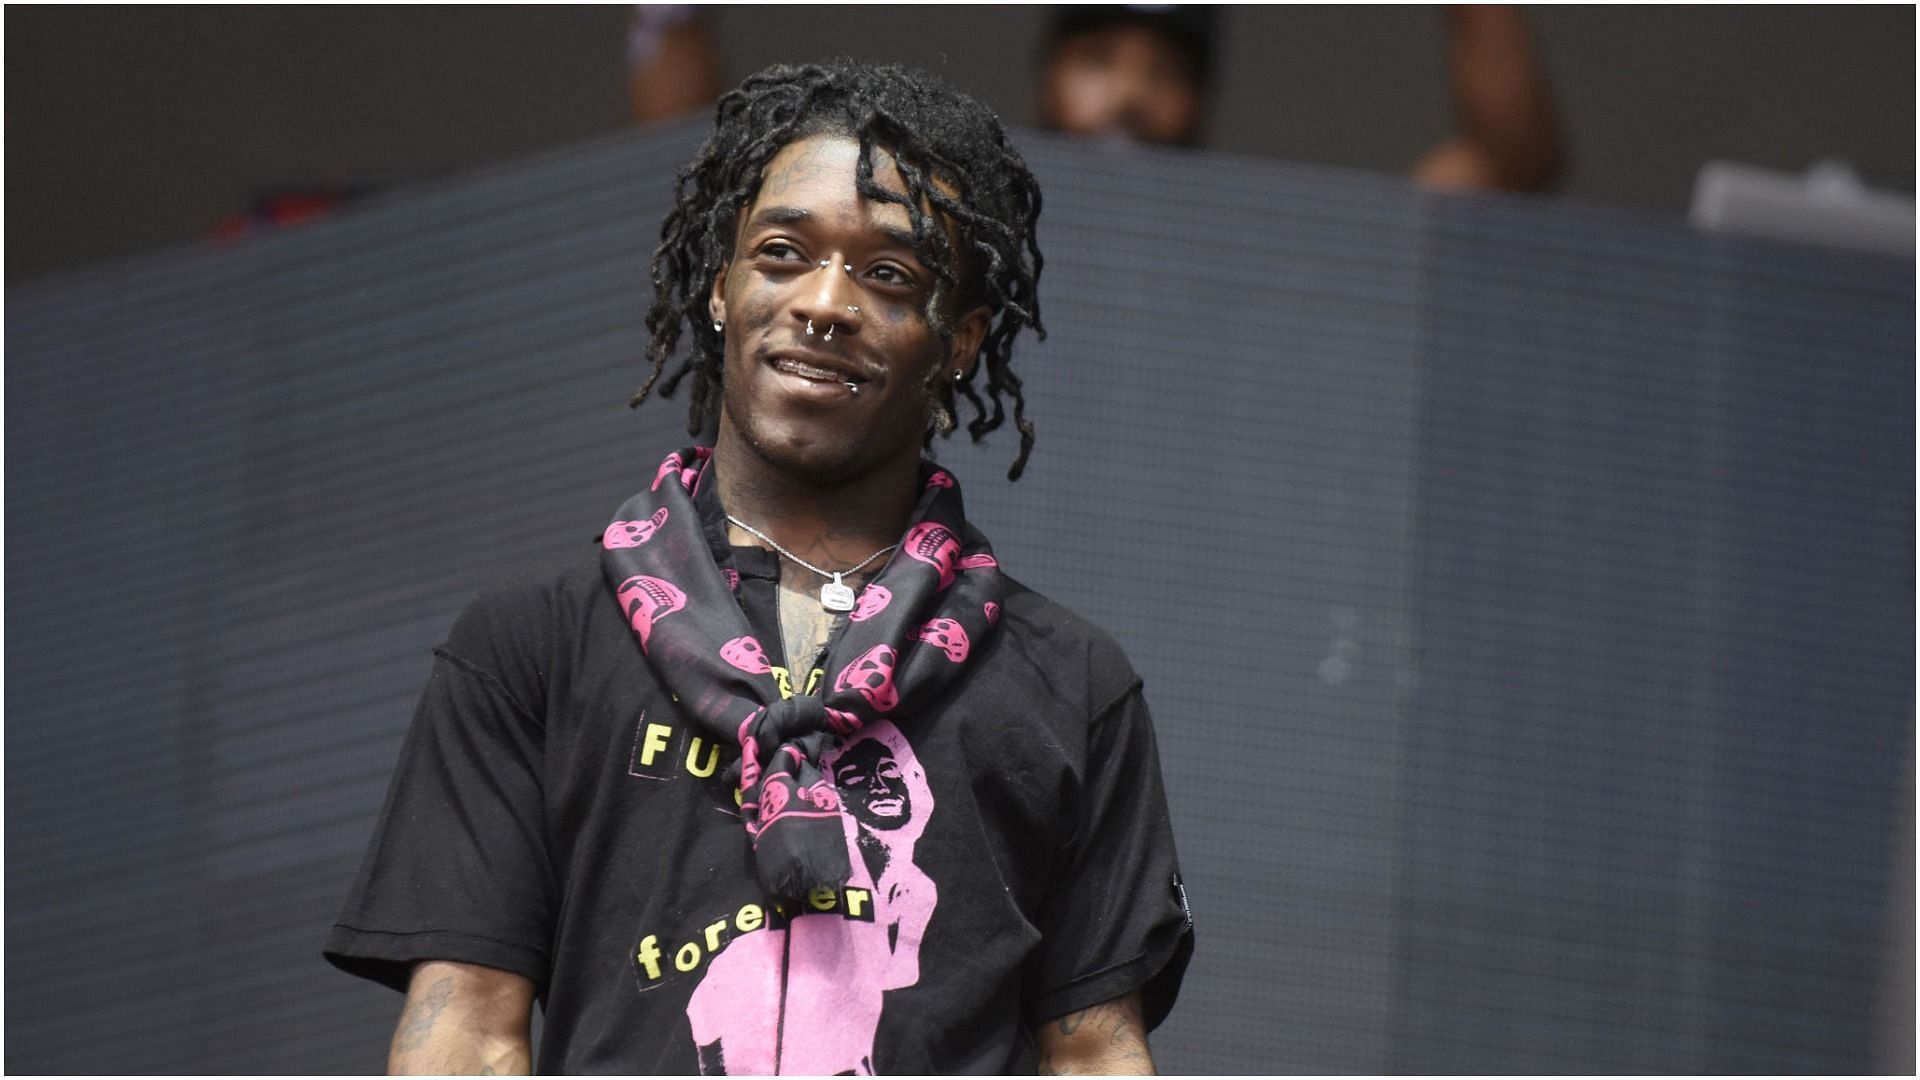 Lil Uzi Vert has avoided going to prison by pleading no contest in an assault case (Image via Tim Mosenfelder/Getty Images)